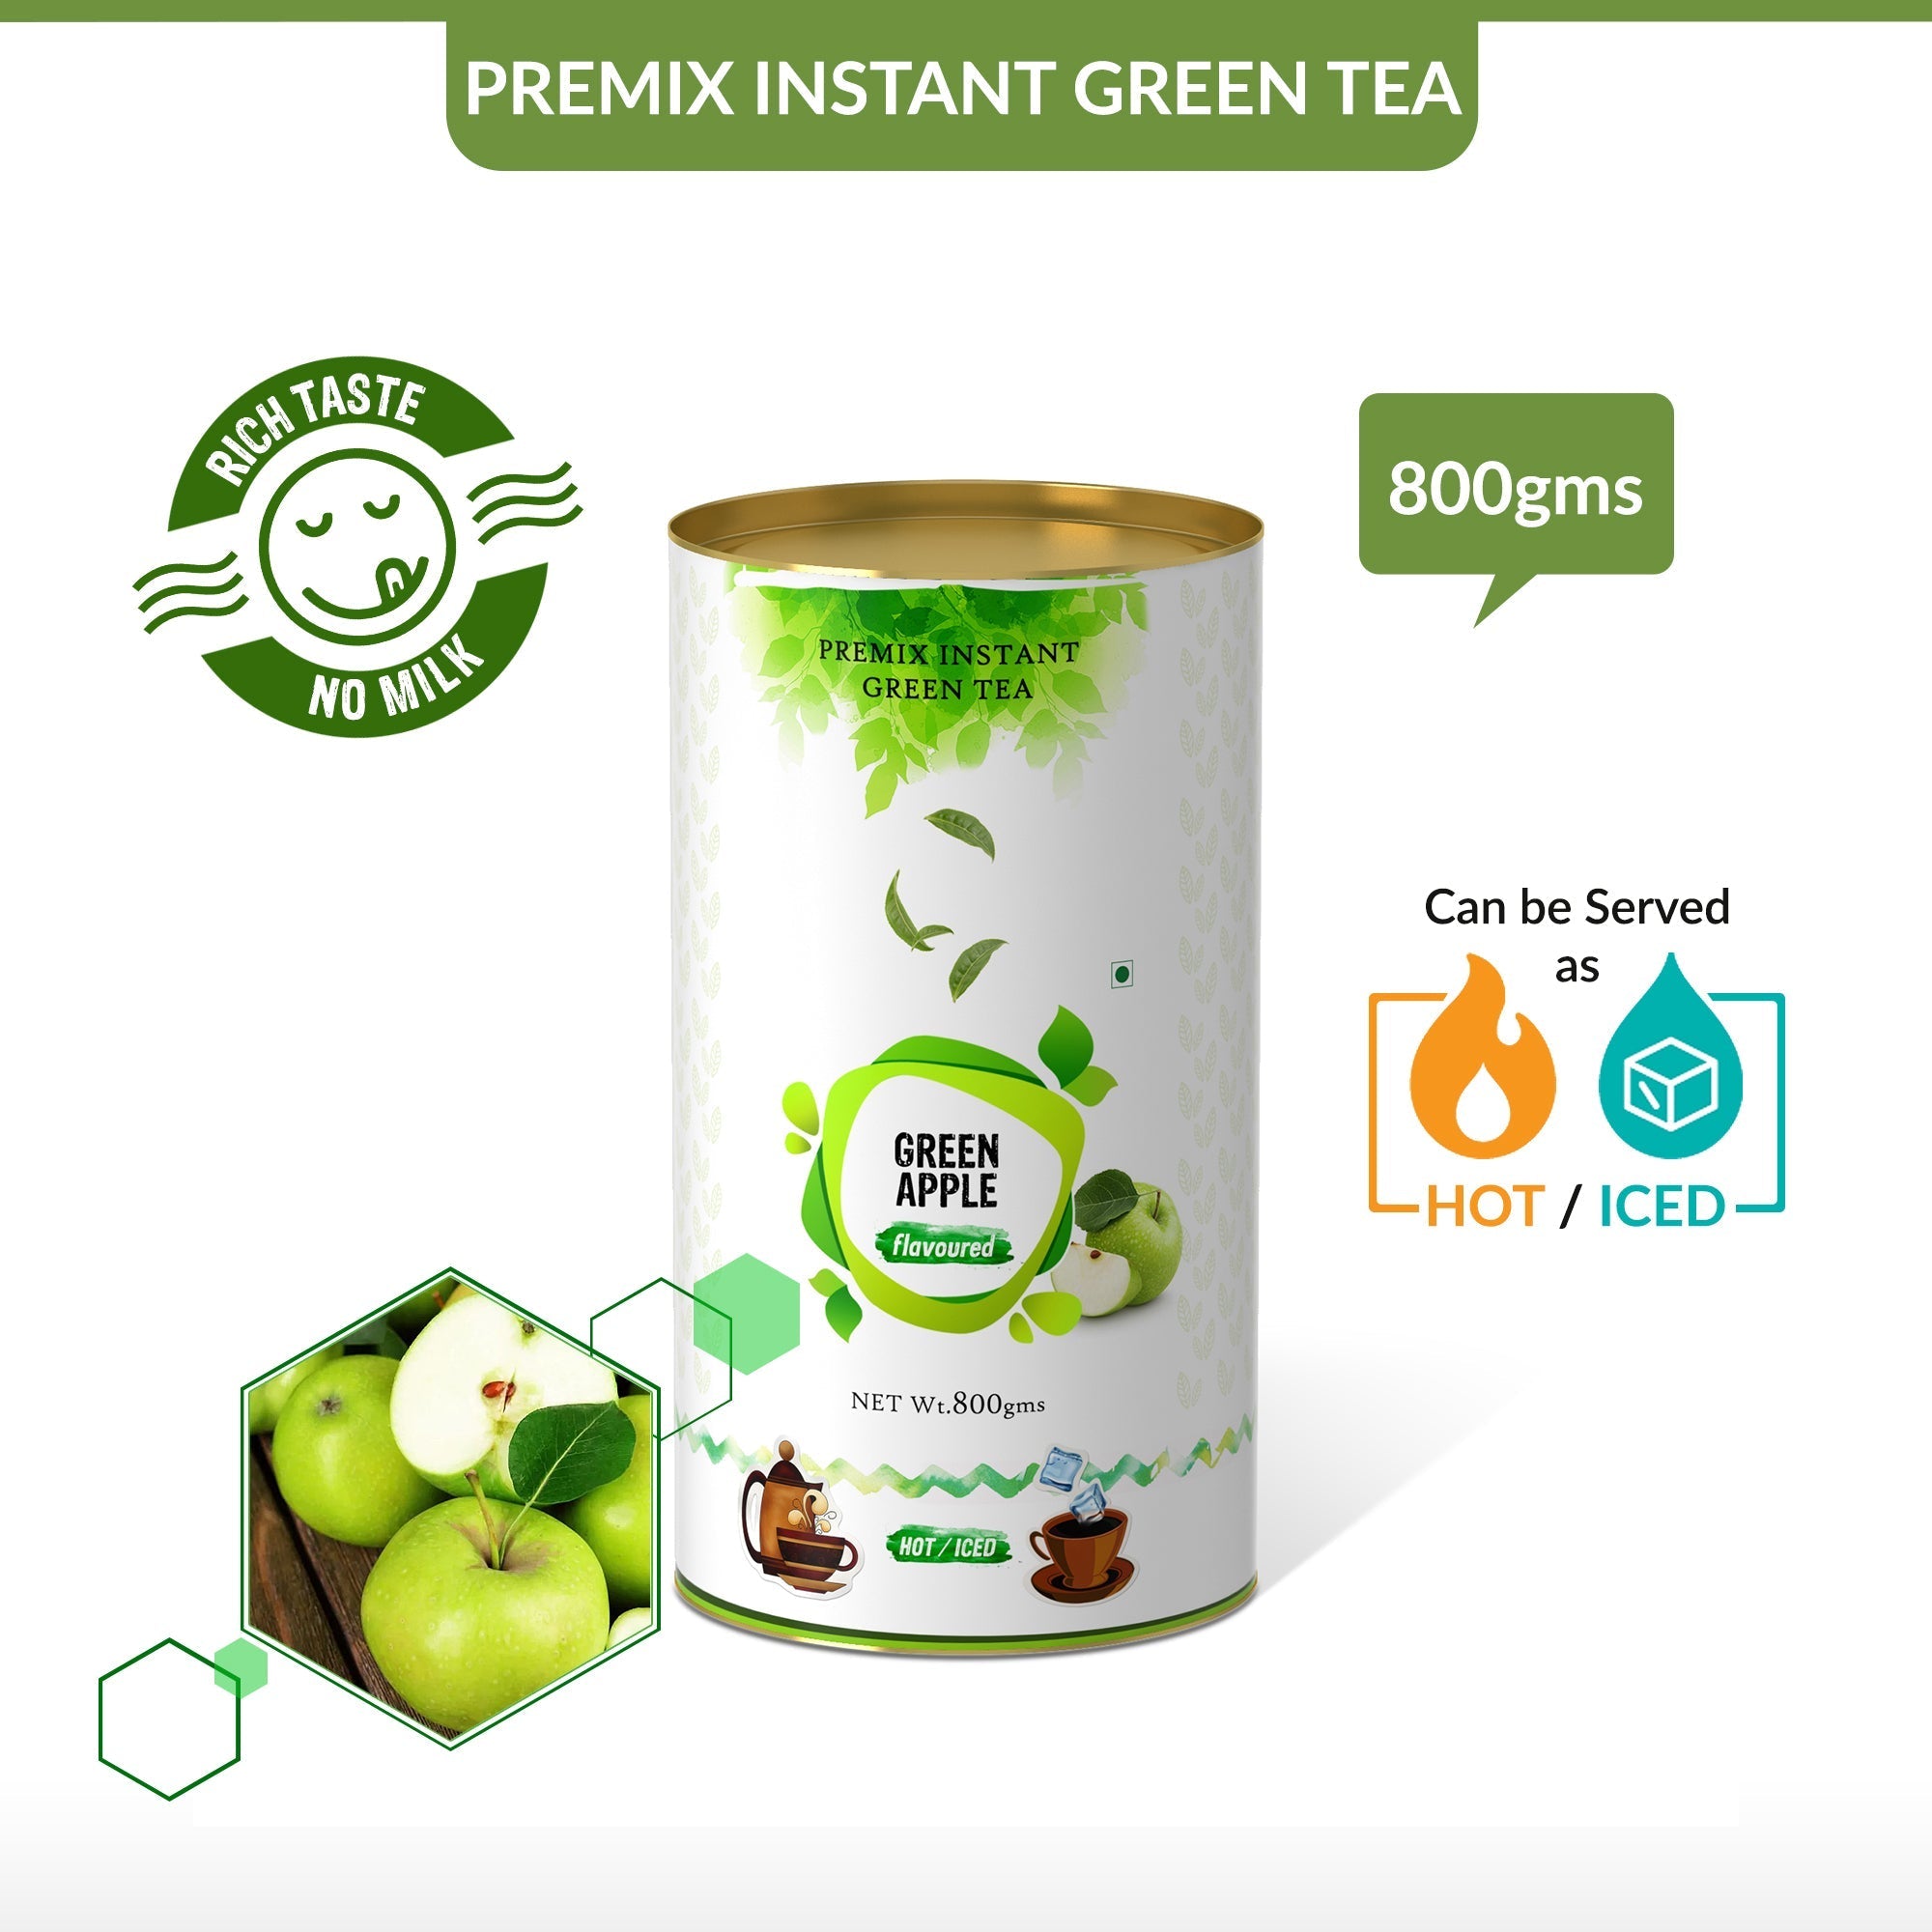 Green Apple Flavored Instant Green Tea - 800 gms